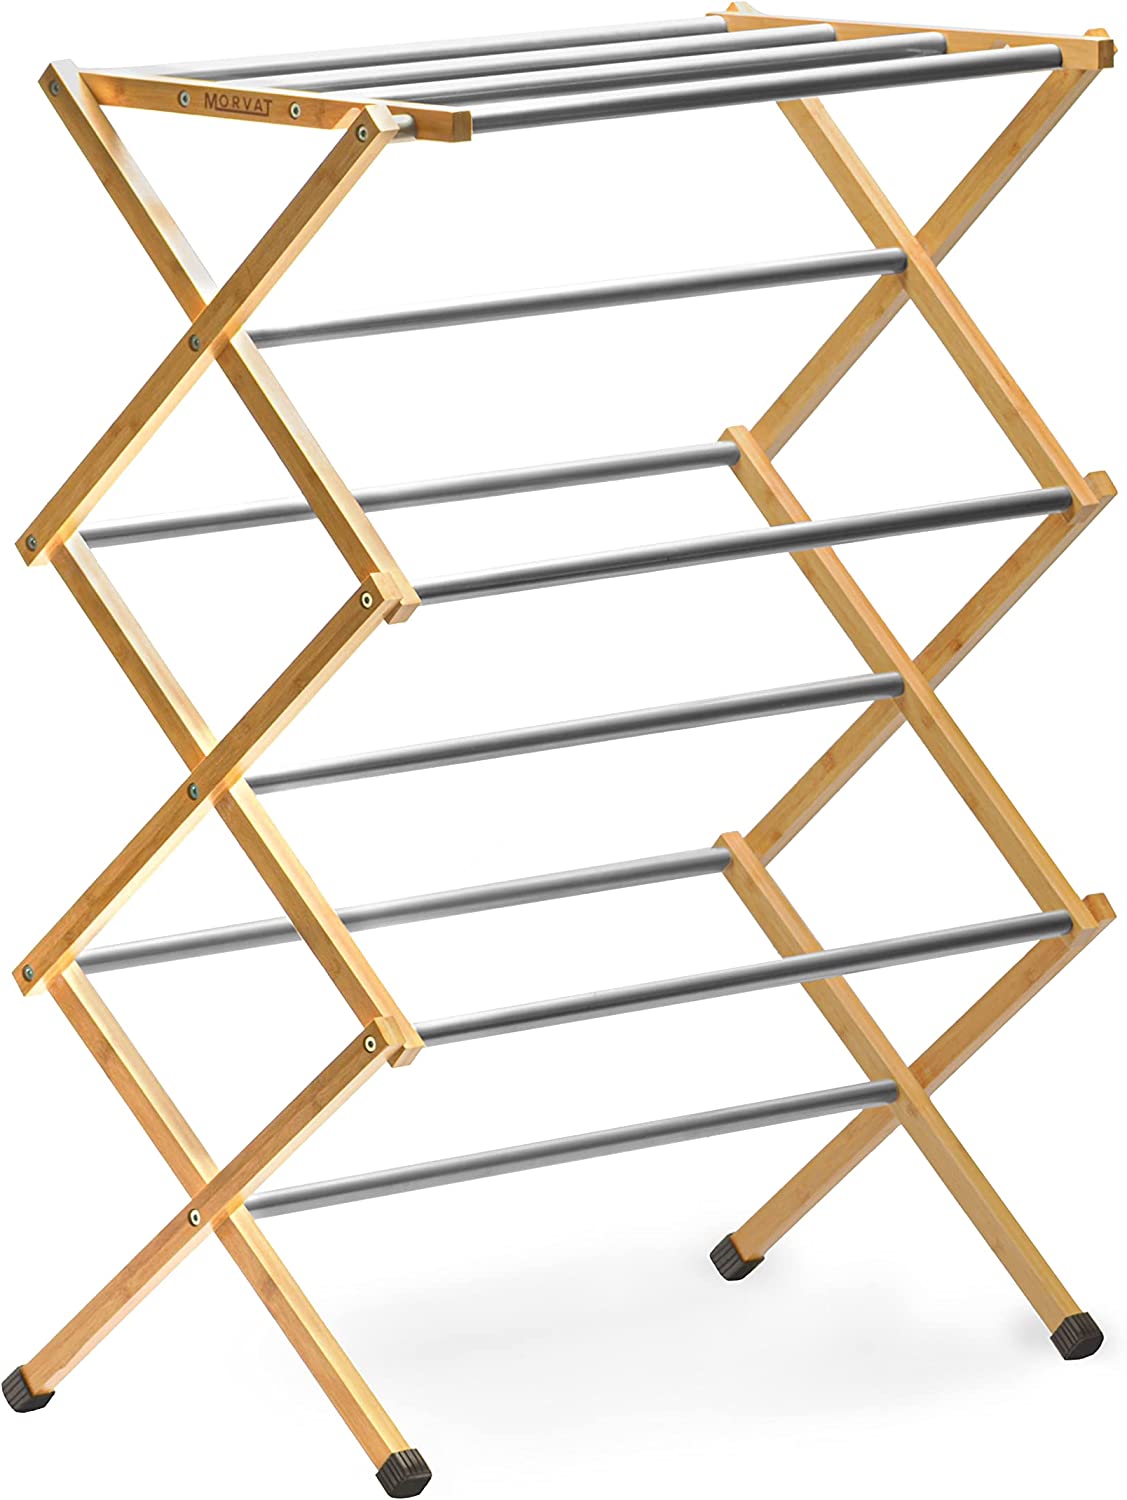 Morvat Premium Bamboo Folding Clothing Drying Rack with Metal Poles, from Amazon. 